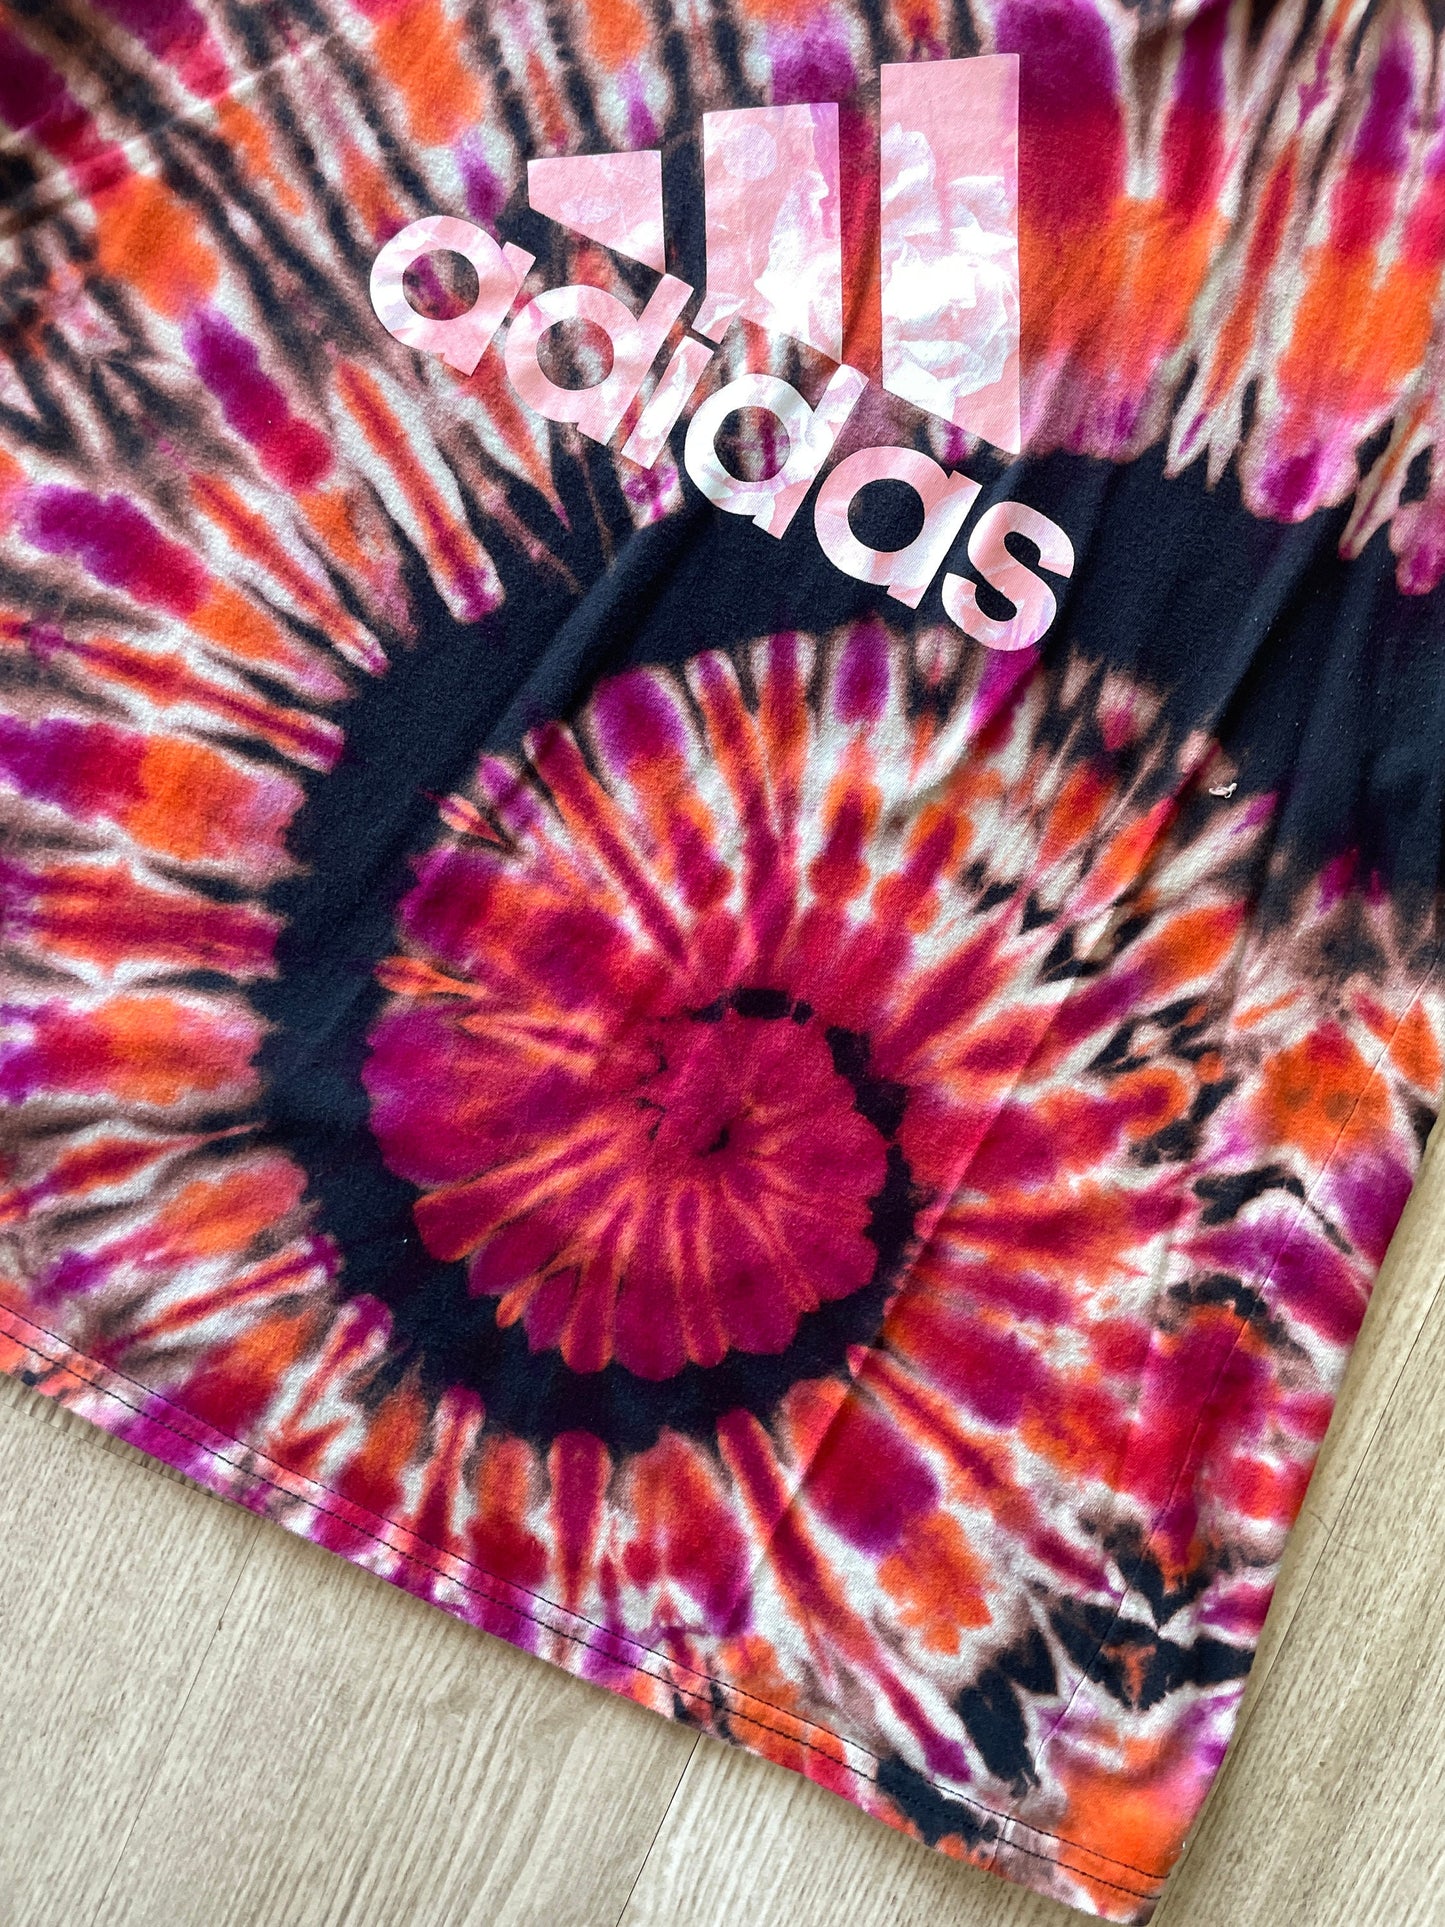 2XL Women's adidas Roses Handmade Reverse Tie Dye Short Sleeve T-Shirt | One-Of-a-Kind Upcycled Black and Pink Spiral Top